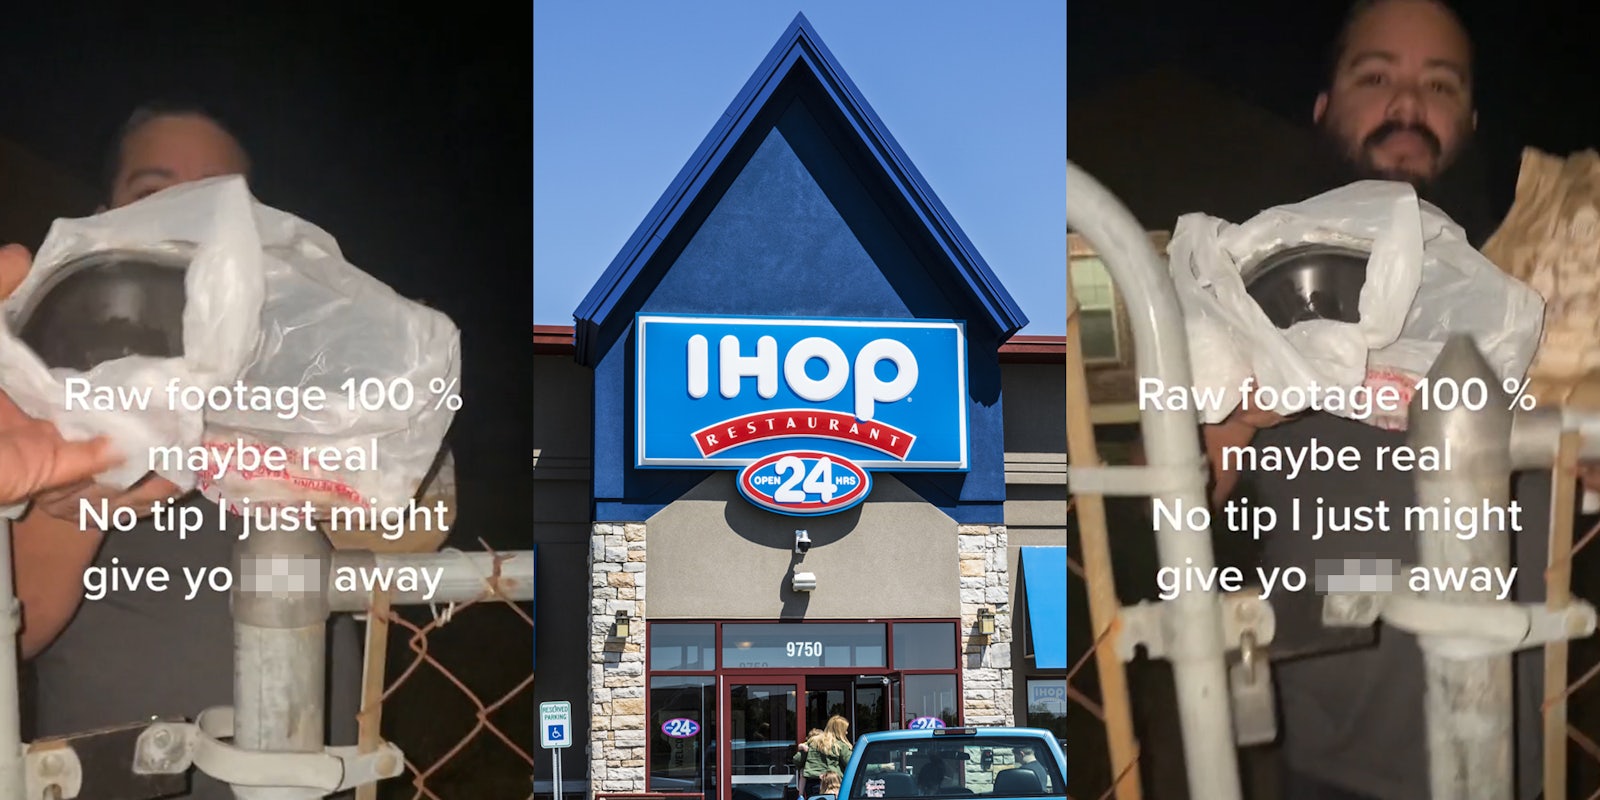 delivery driver handing man food over fence with caption 'Raw footage 100% maybe real No tip I might just give yo blank away' (l) IHOP sign on building (c) man holding food over fence with caption 'Raw footage 100% maybe real No tip I might just give yo blank away' (r)